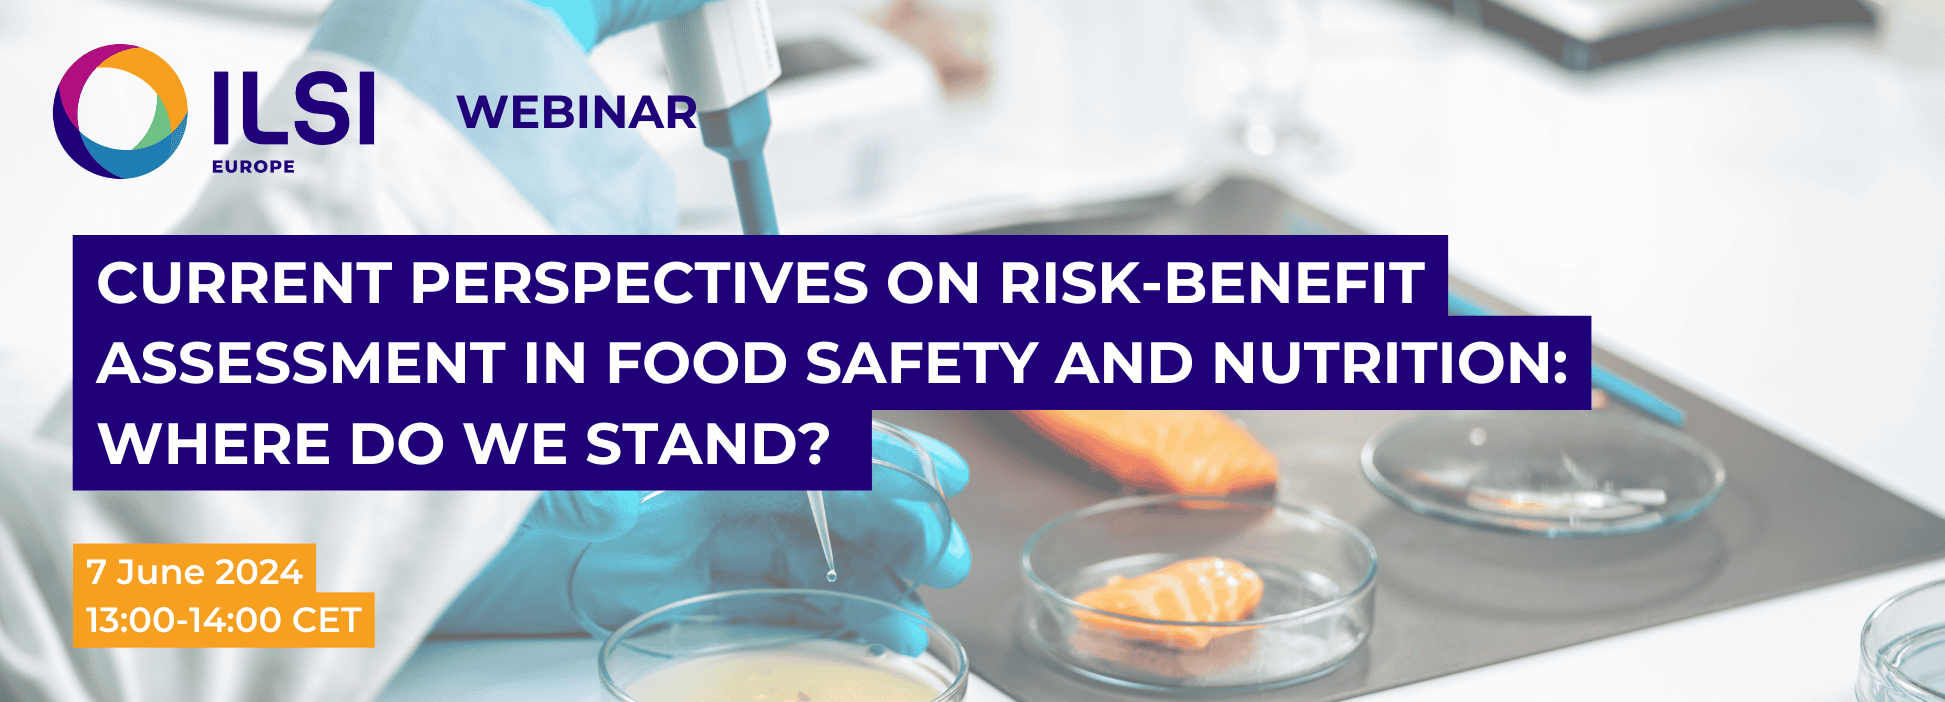 Current Perspectives on Risk-Benefit Assessment in Food Safety and Nutrition Where Do We Stand